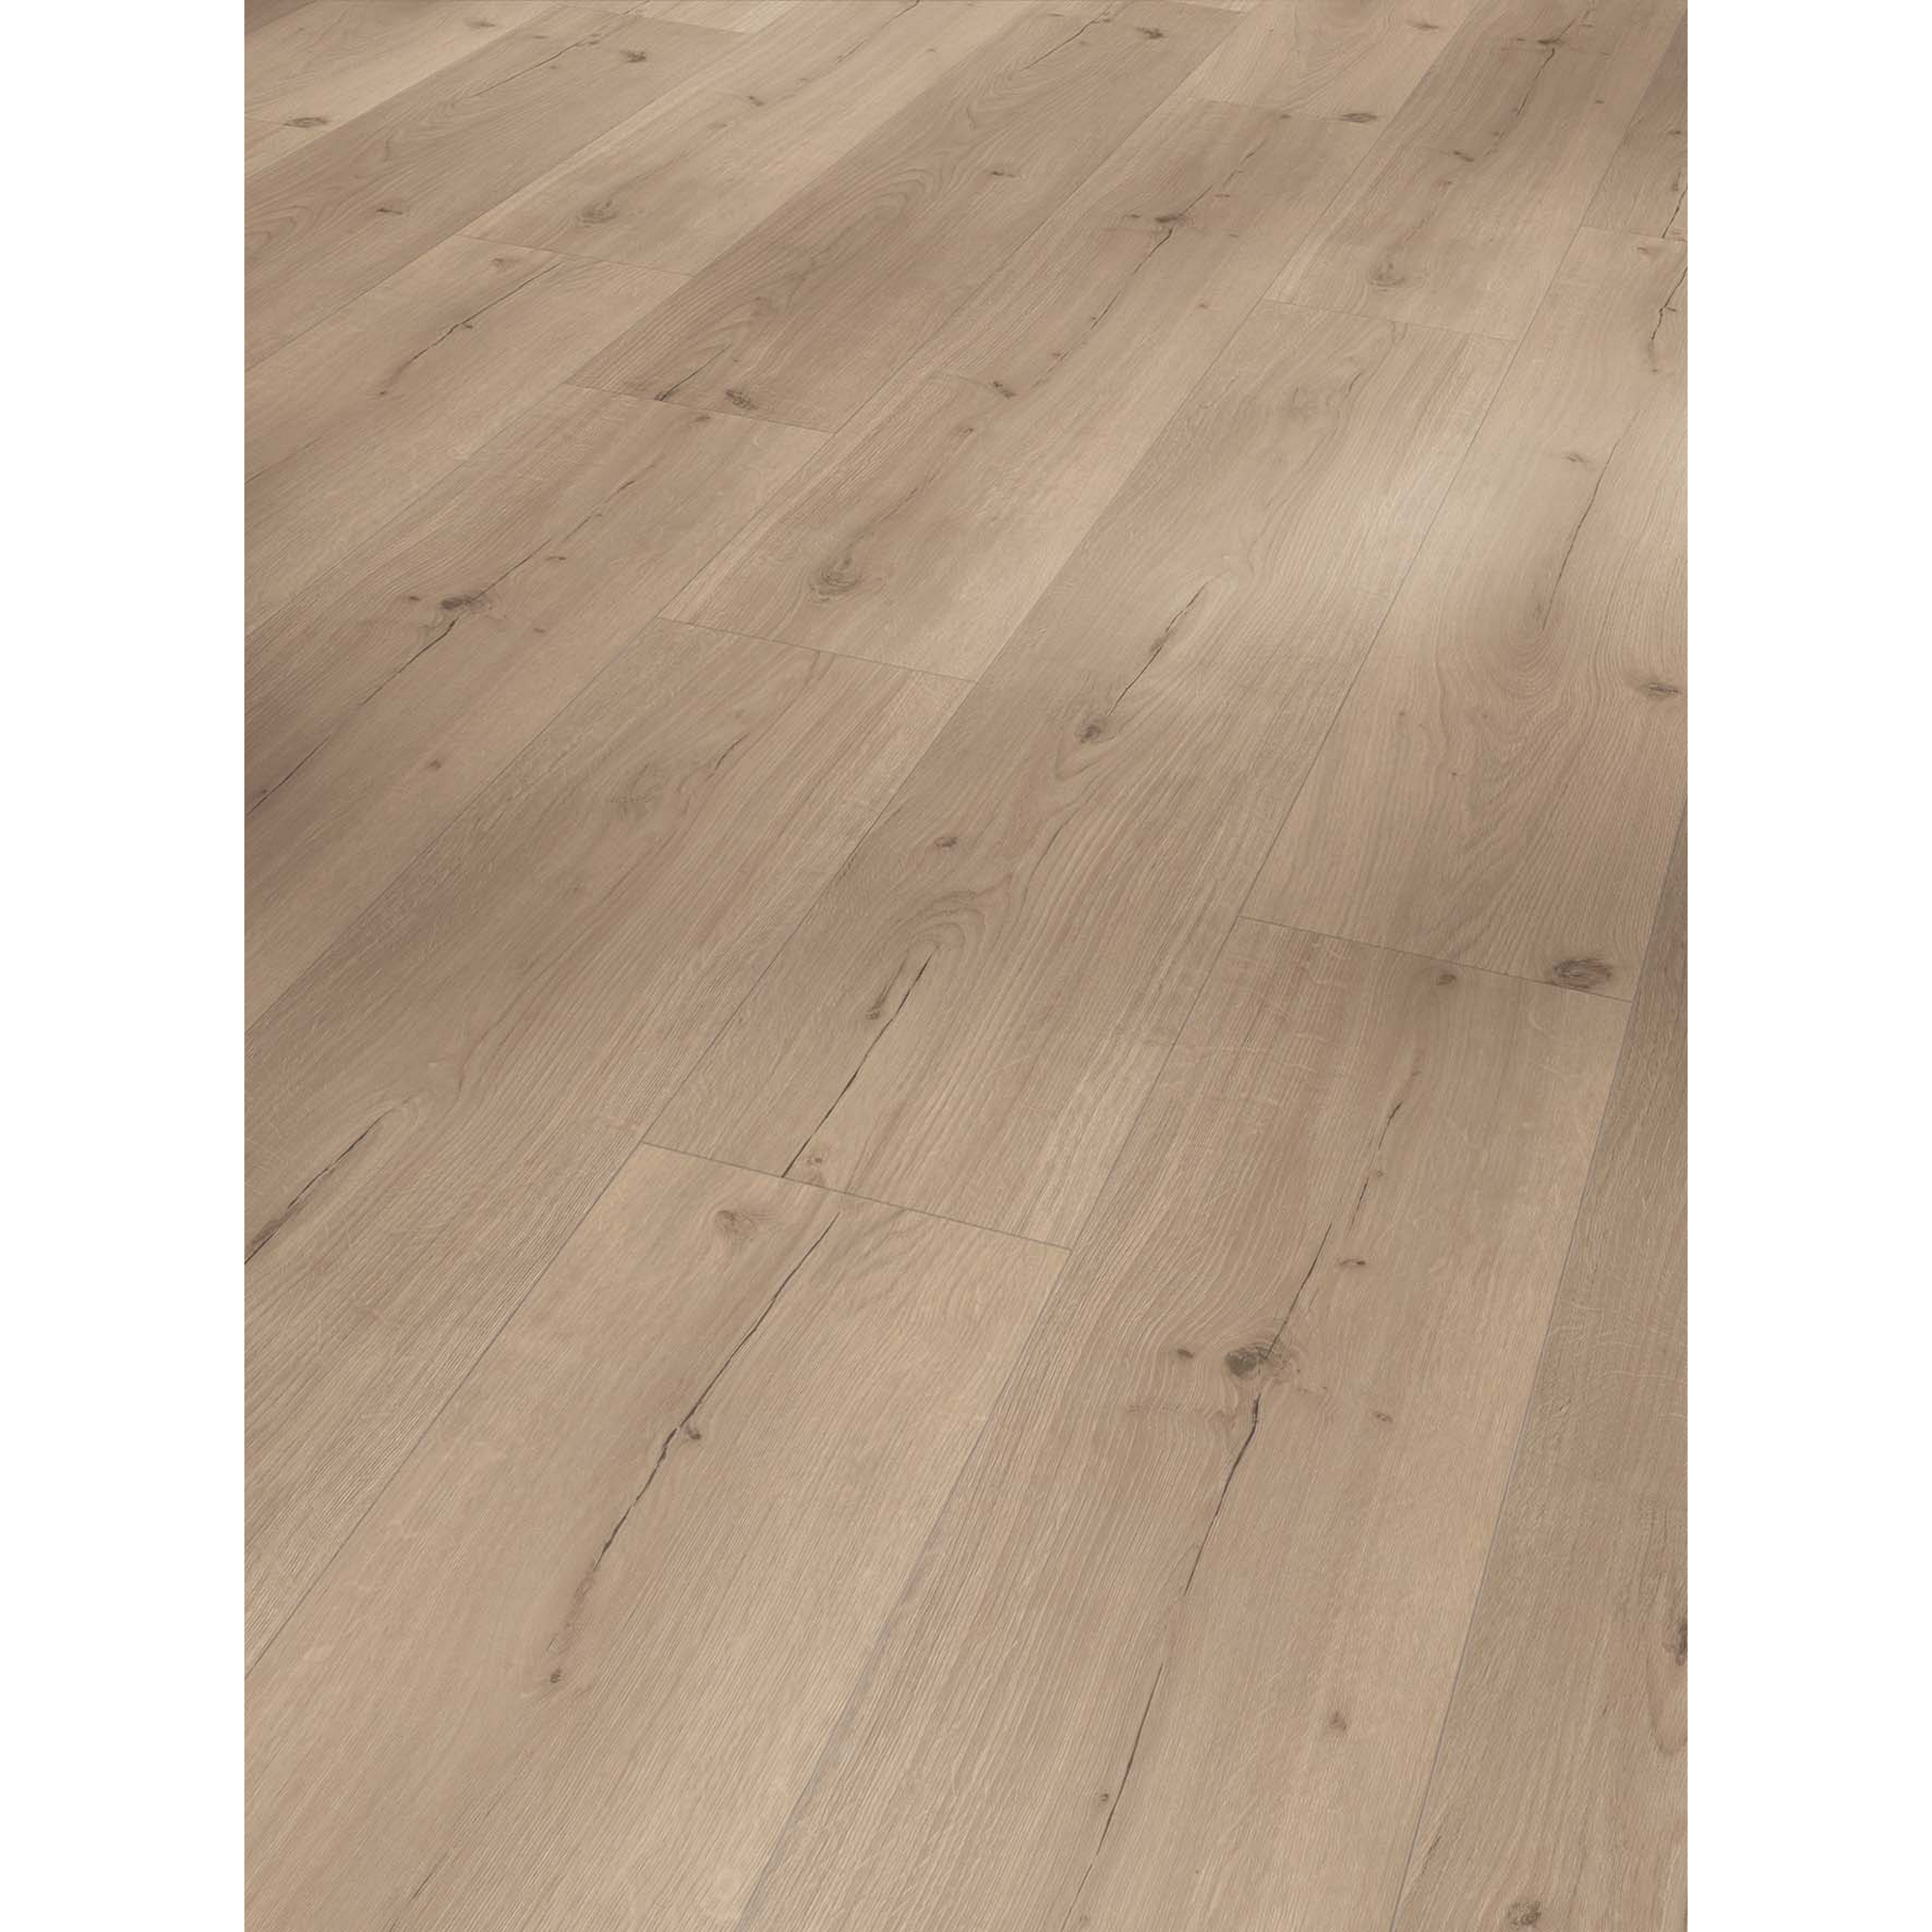 Designboden 'Basic 5.3' Eiche Infinity grau 5,3 mm + product picture